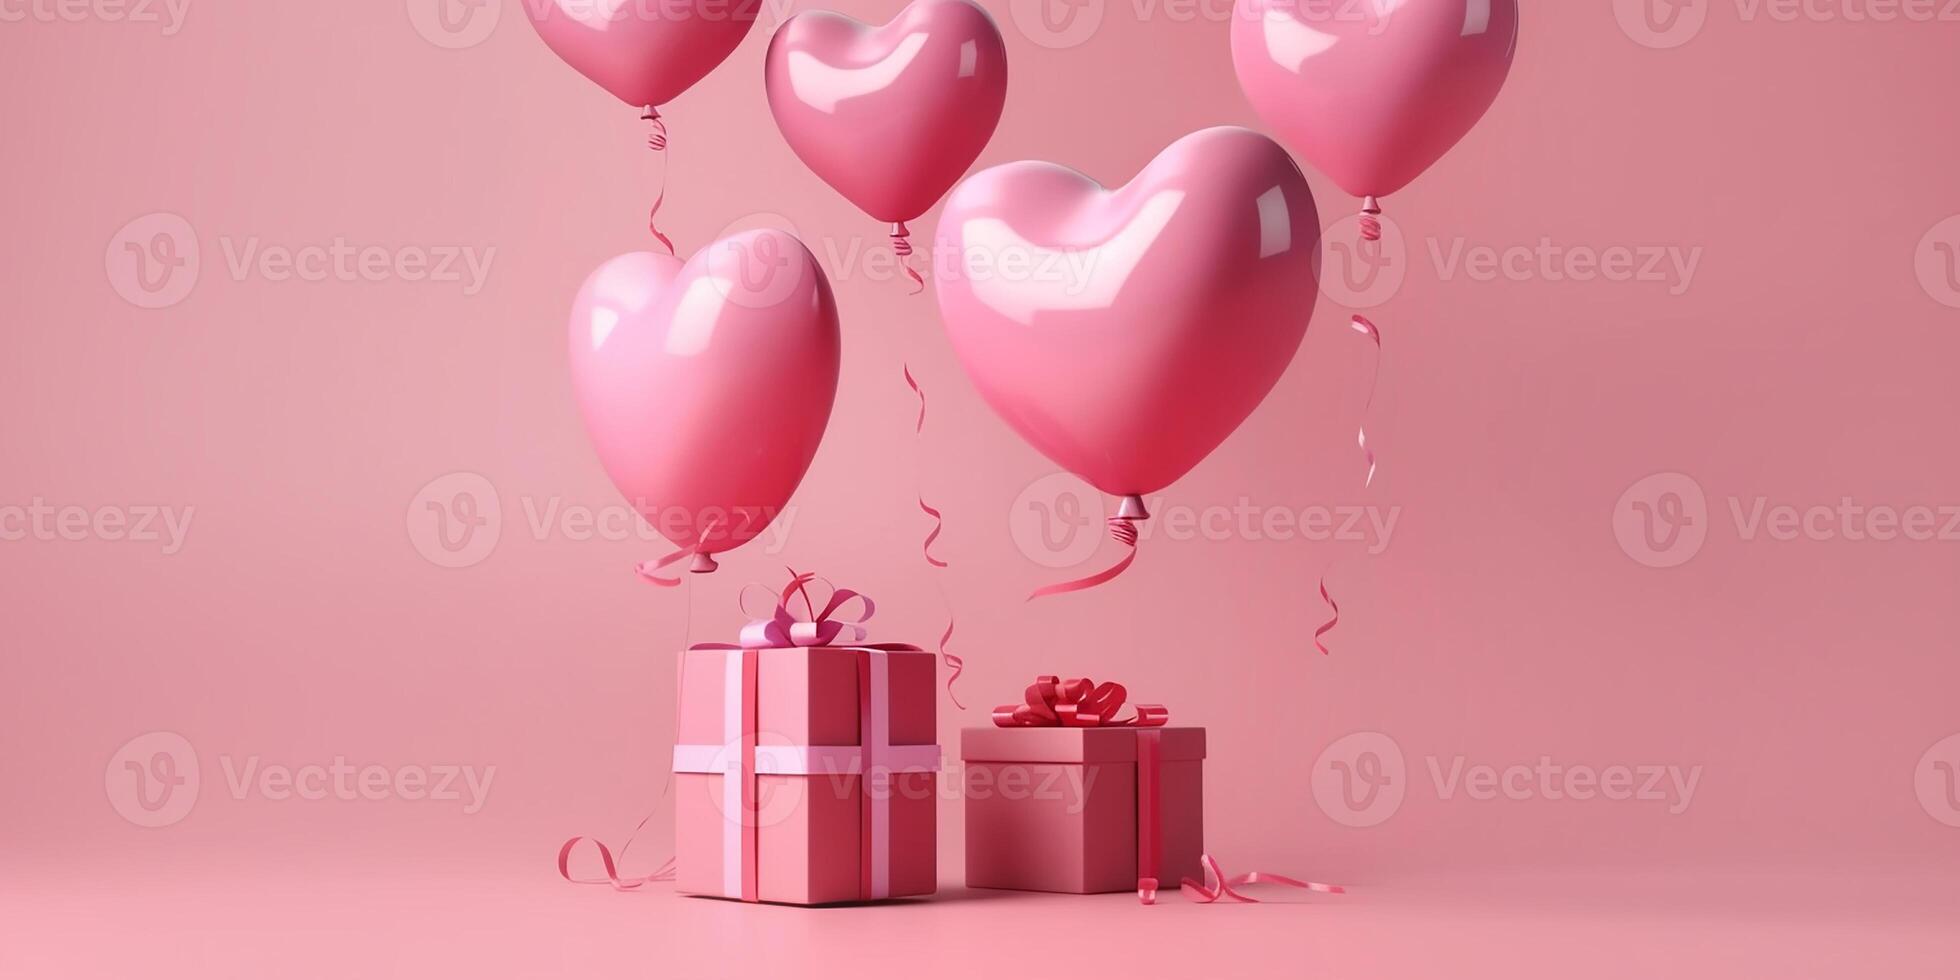 flying heart ballon with gift box, Valentine's Day design concept in pink background. . photo